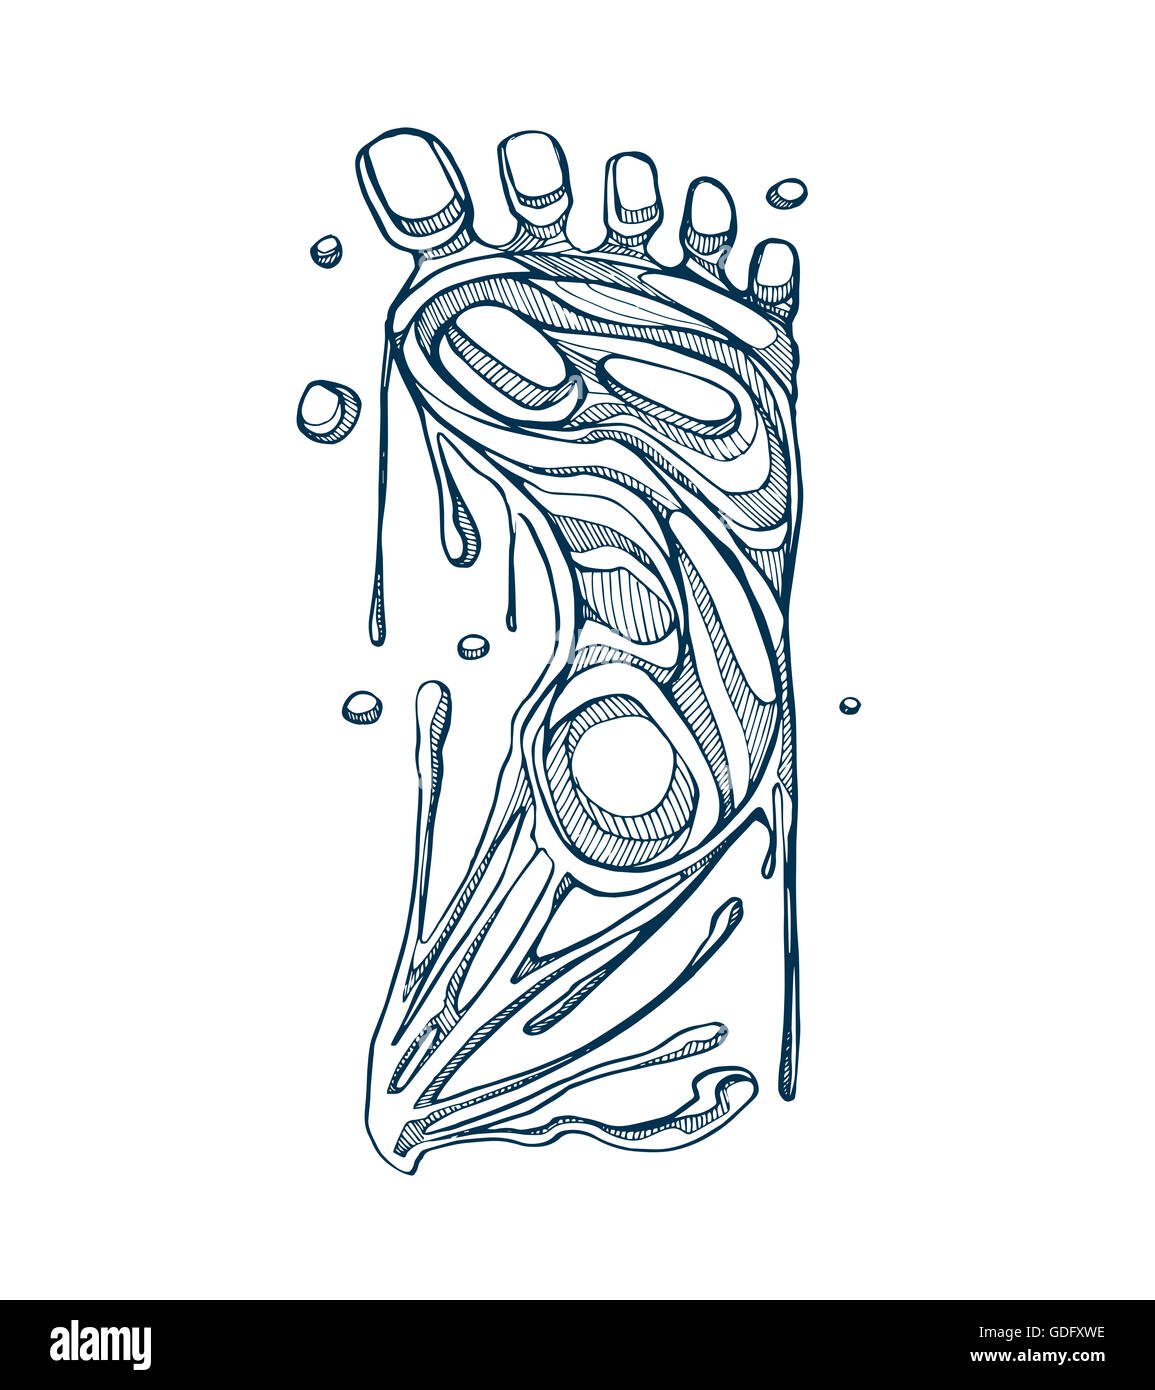 Hand drawn illustration or drawing of a melting foot Stock Photo